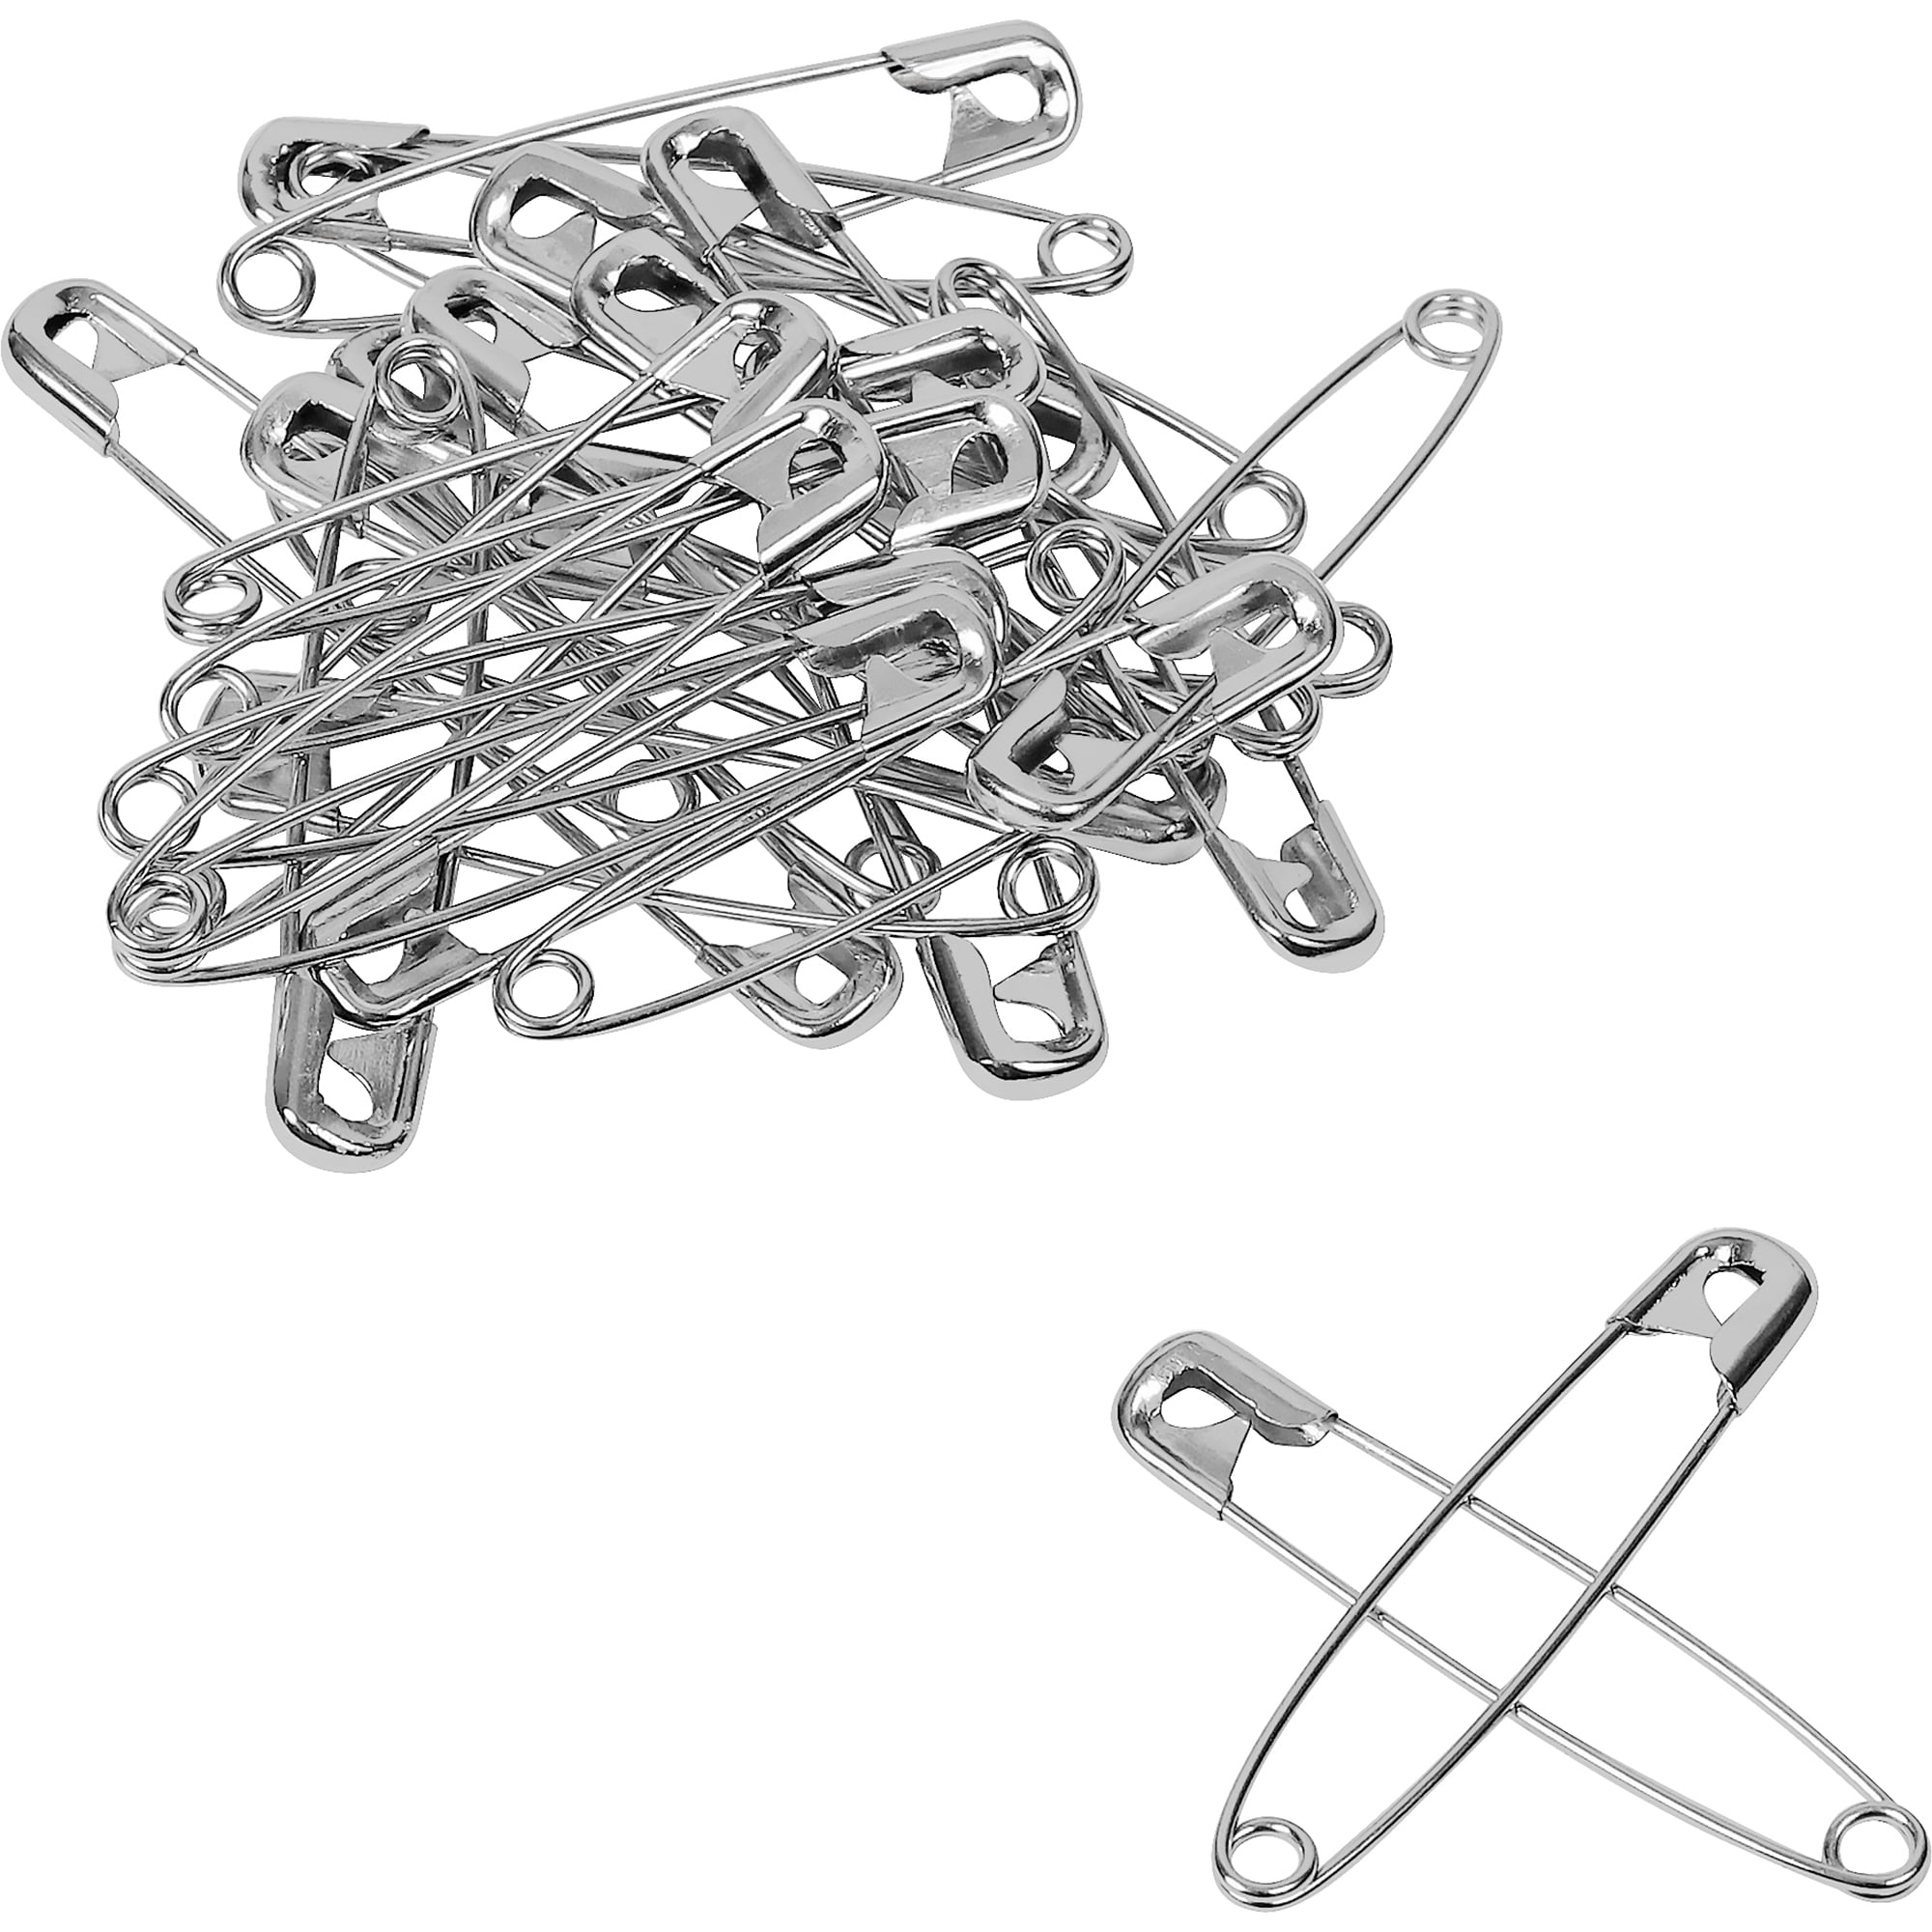  SINGER 00206 Quilting and Craft Safety Pins, Size 3